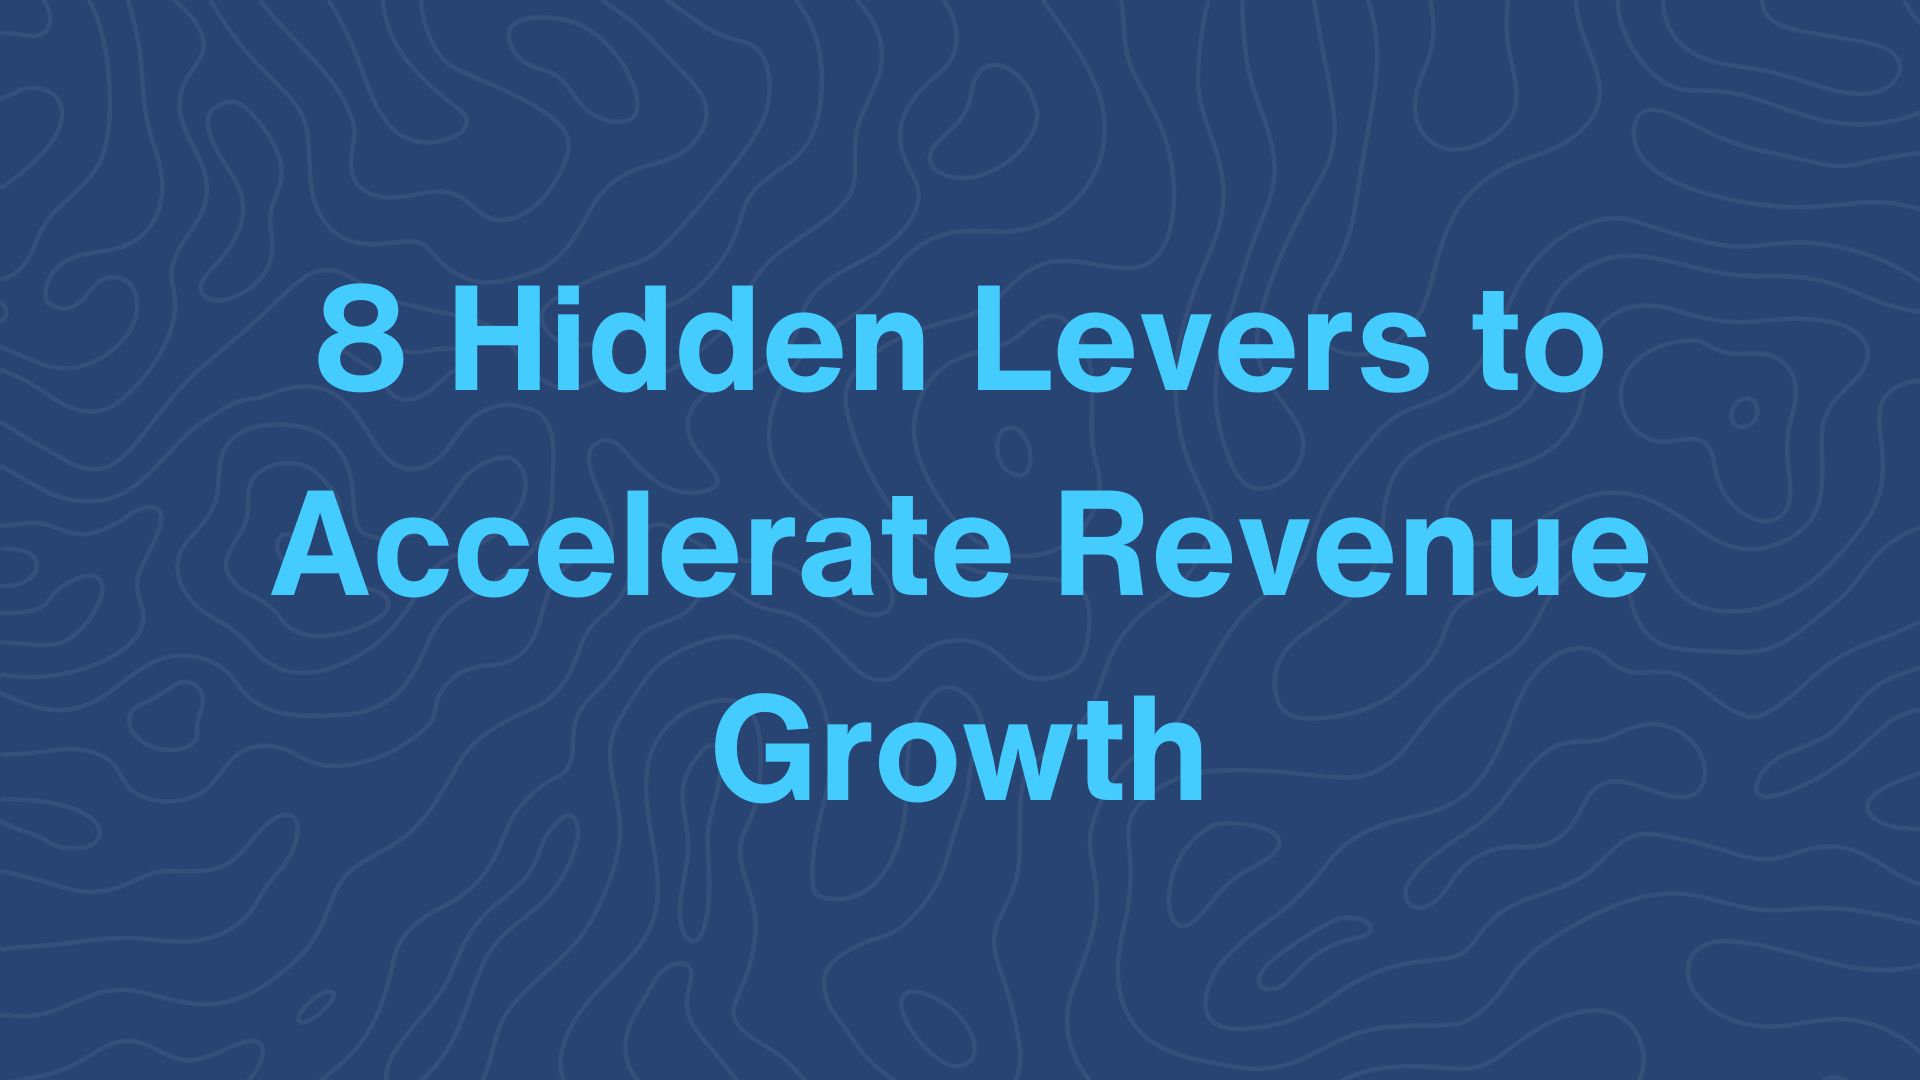 8 Hidden Levers to Accelerate Revenue Growth